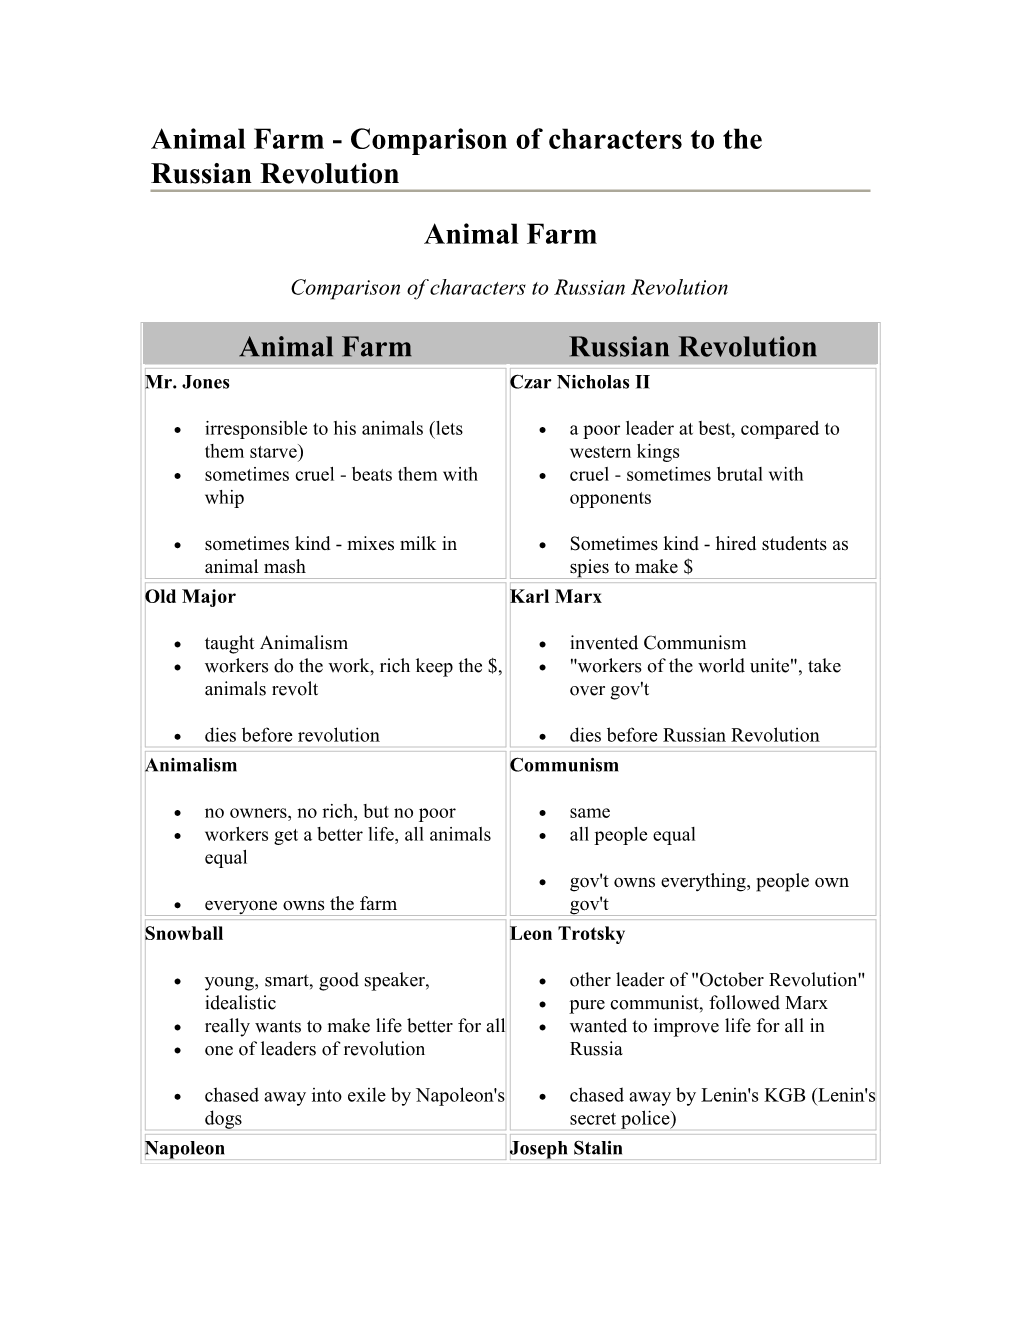 Animal Farm - Comparison of Characters to the Russian Revolution